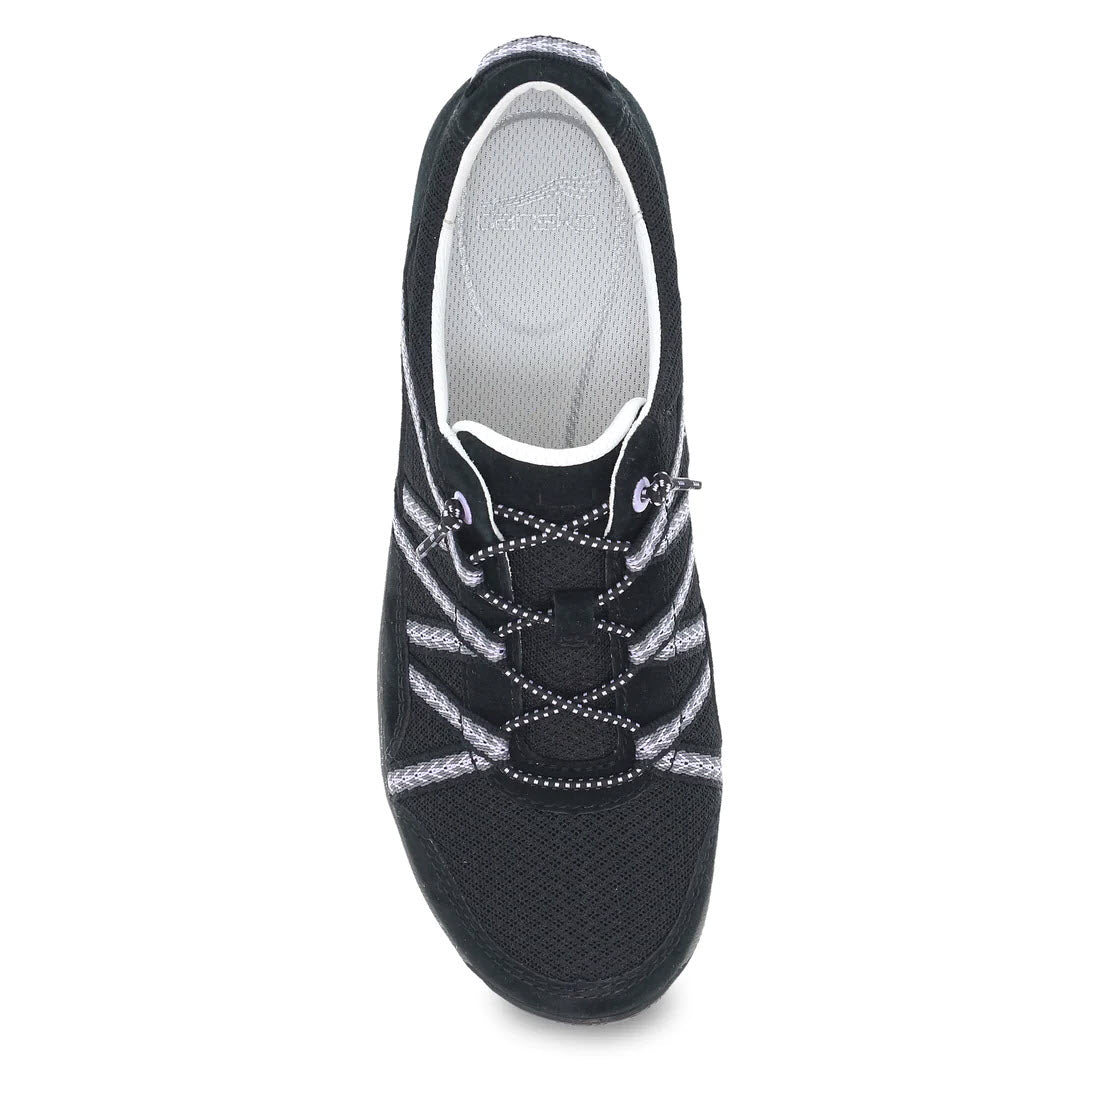 Top view of a single Dansko Harlyn Black sneaker with white soles and silver reflective accents, isolated on a white background.